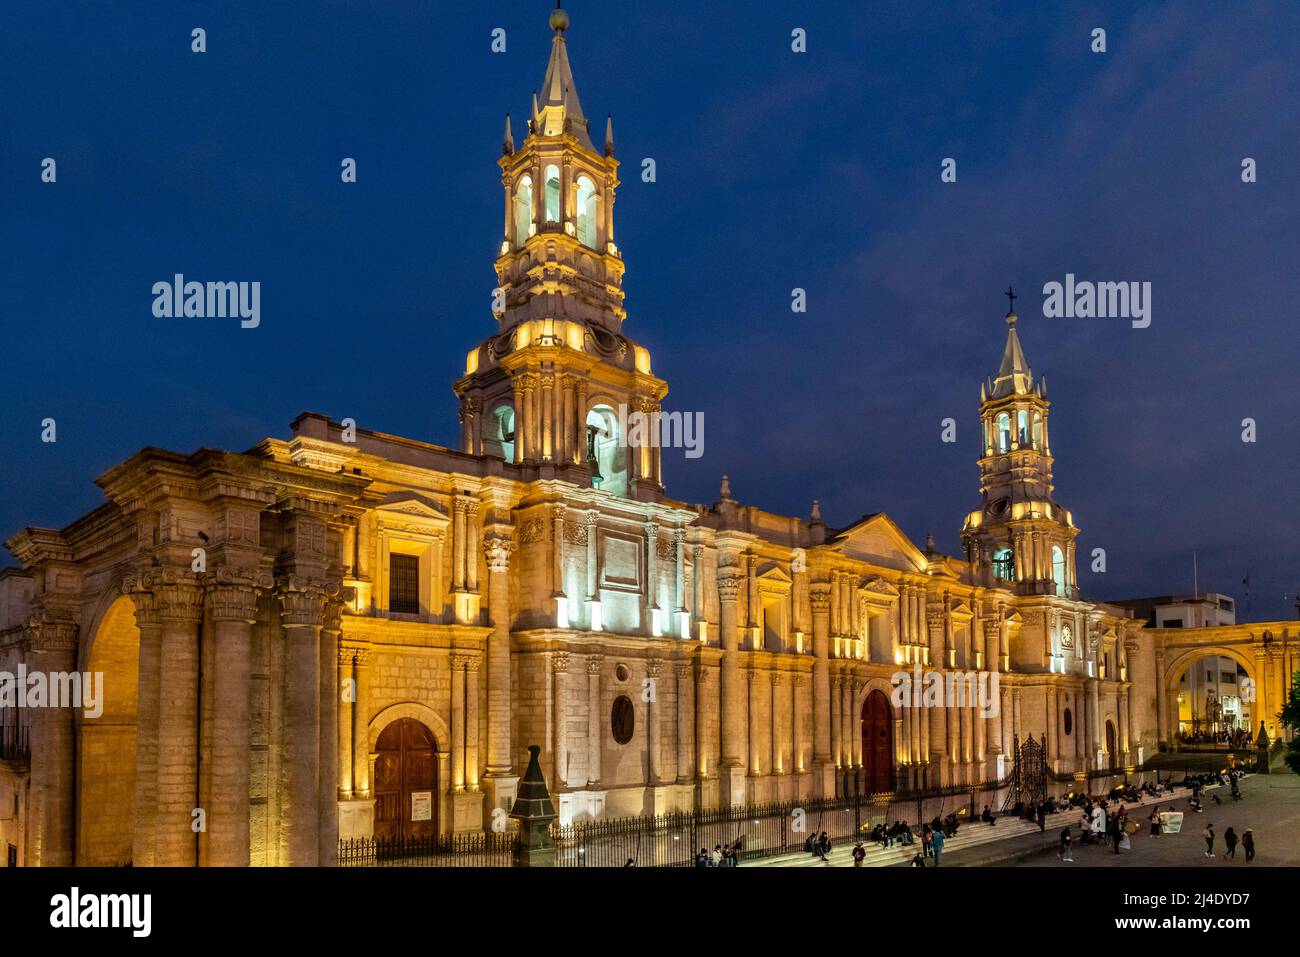 The Basilica Cathedral of Arequipa, Arequipa, Peru. Stock Photo